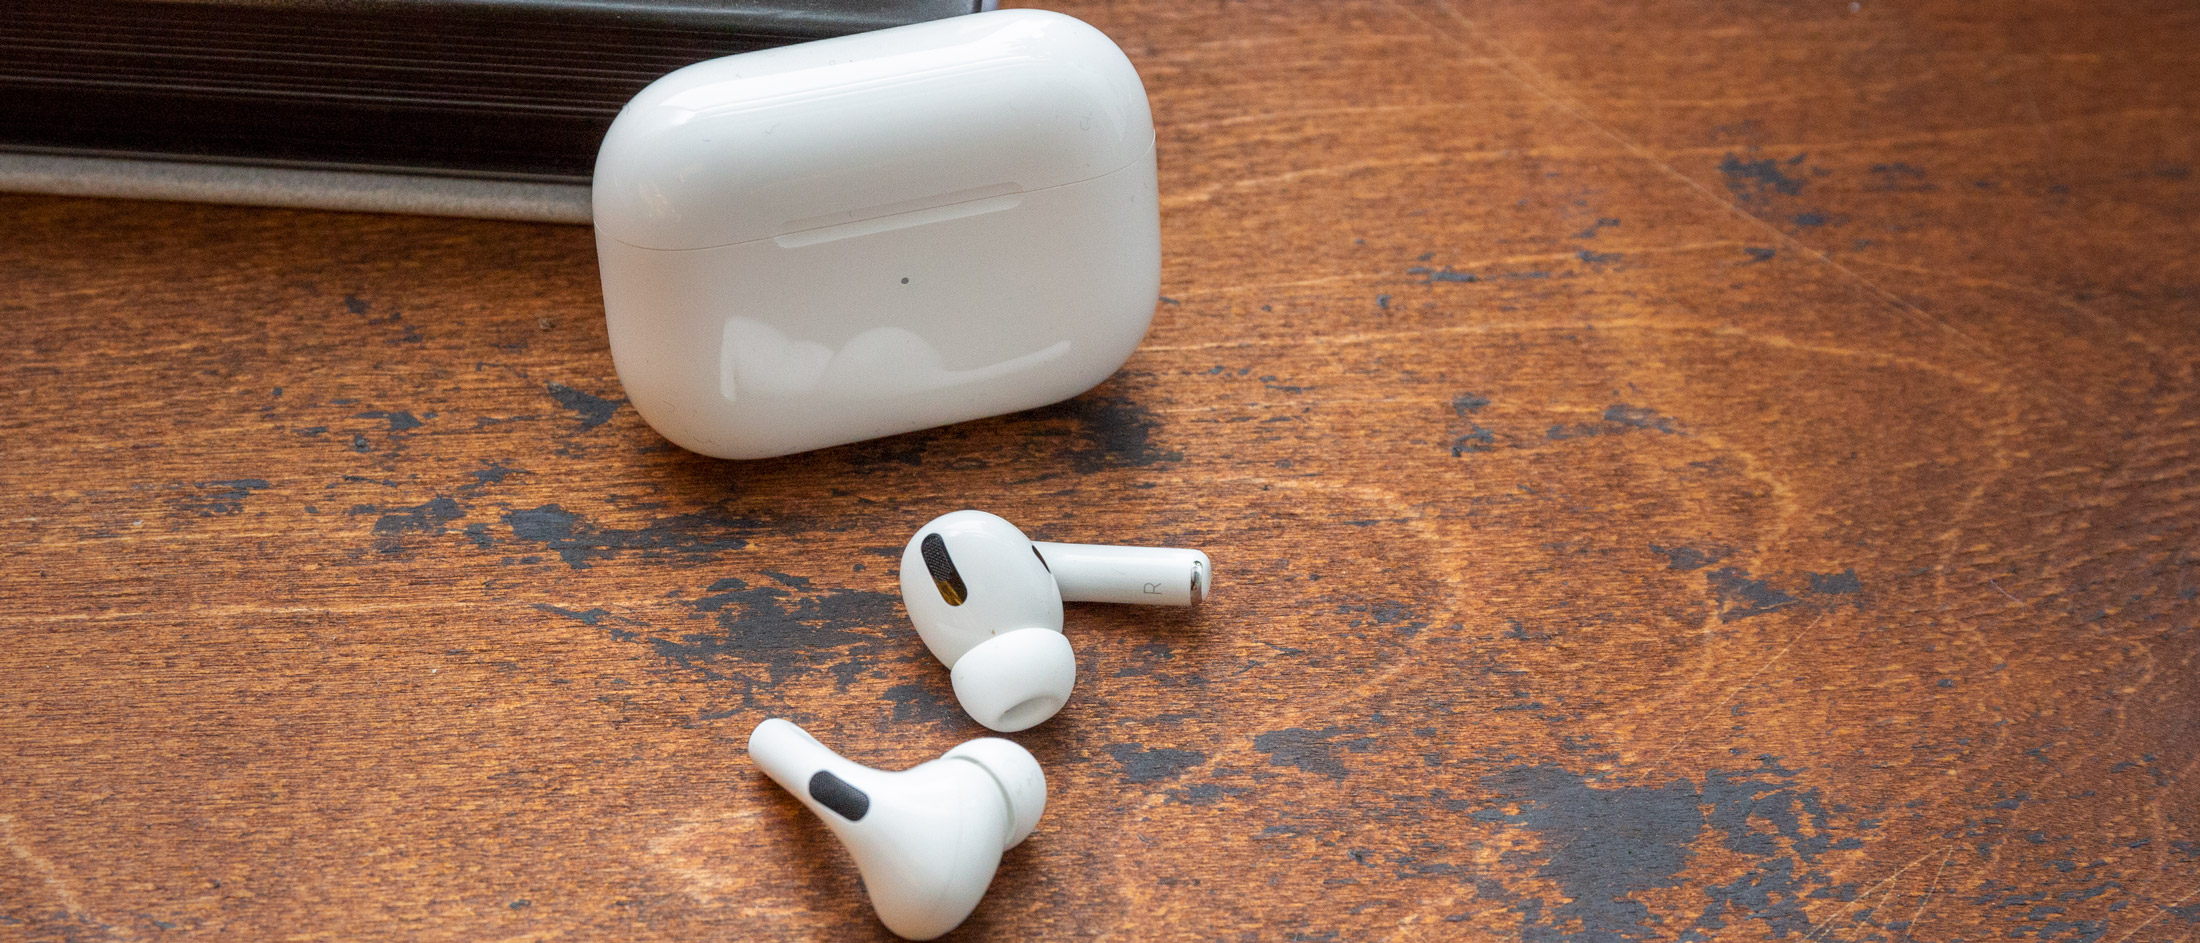 AirPods Pro review | Tom's Guide